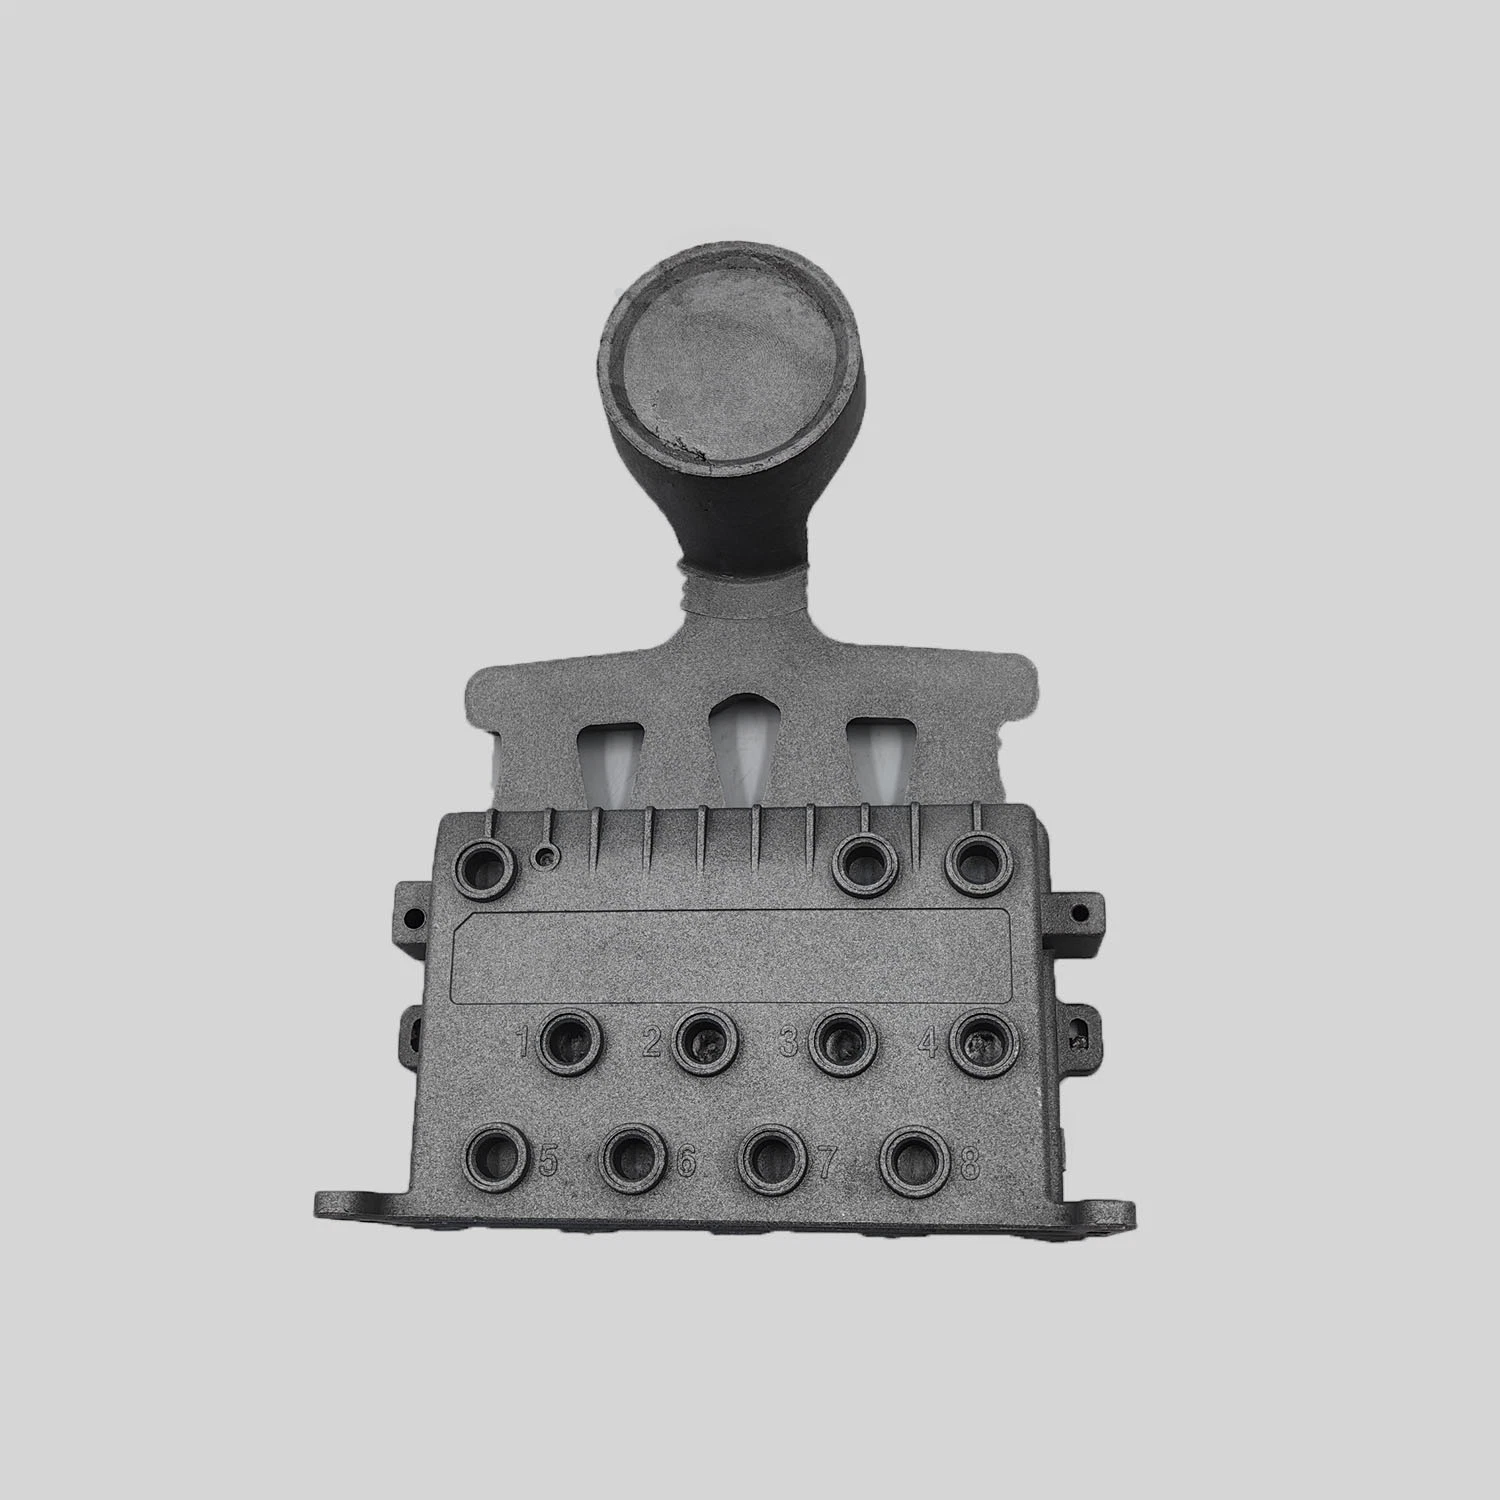 Customized Design Drawing Aluminum Sand Casting/ Gravity Casting /CNC Machining & Low Pressure Die Casting Spare Parts Made in China Factory